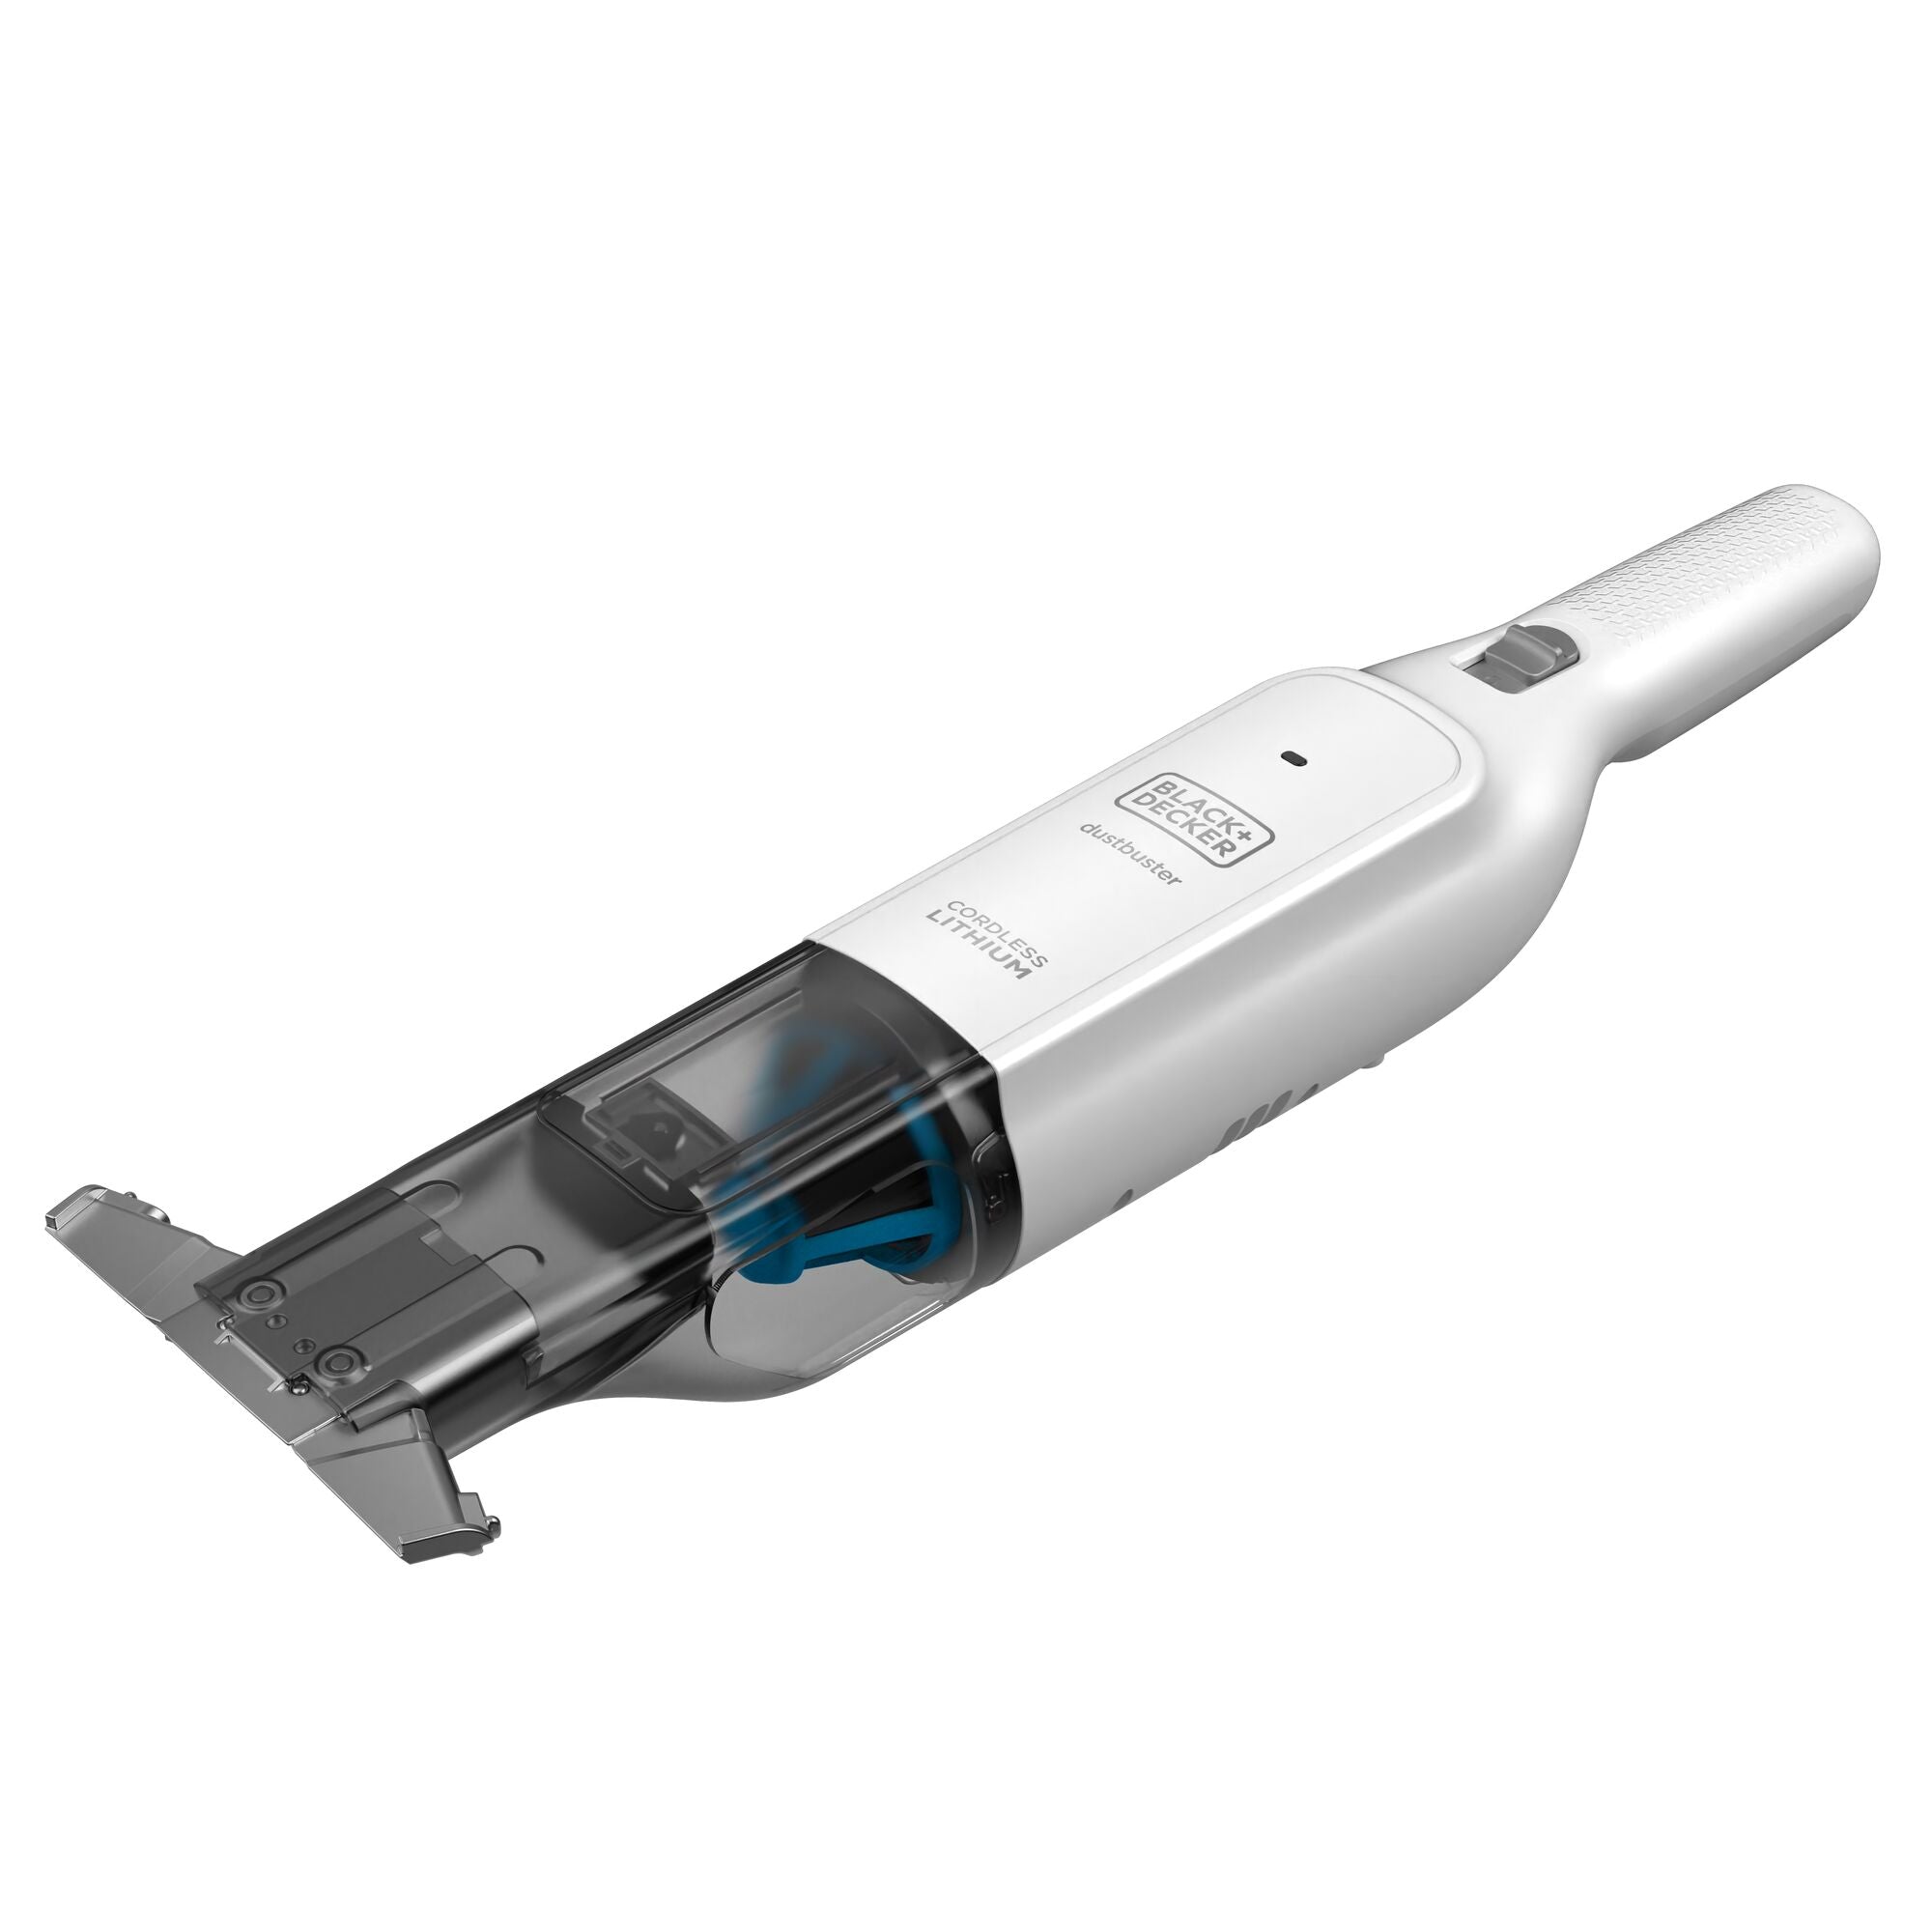 Washable brush feature of a advanced clean cordless hand vacuum.